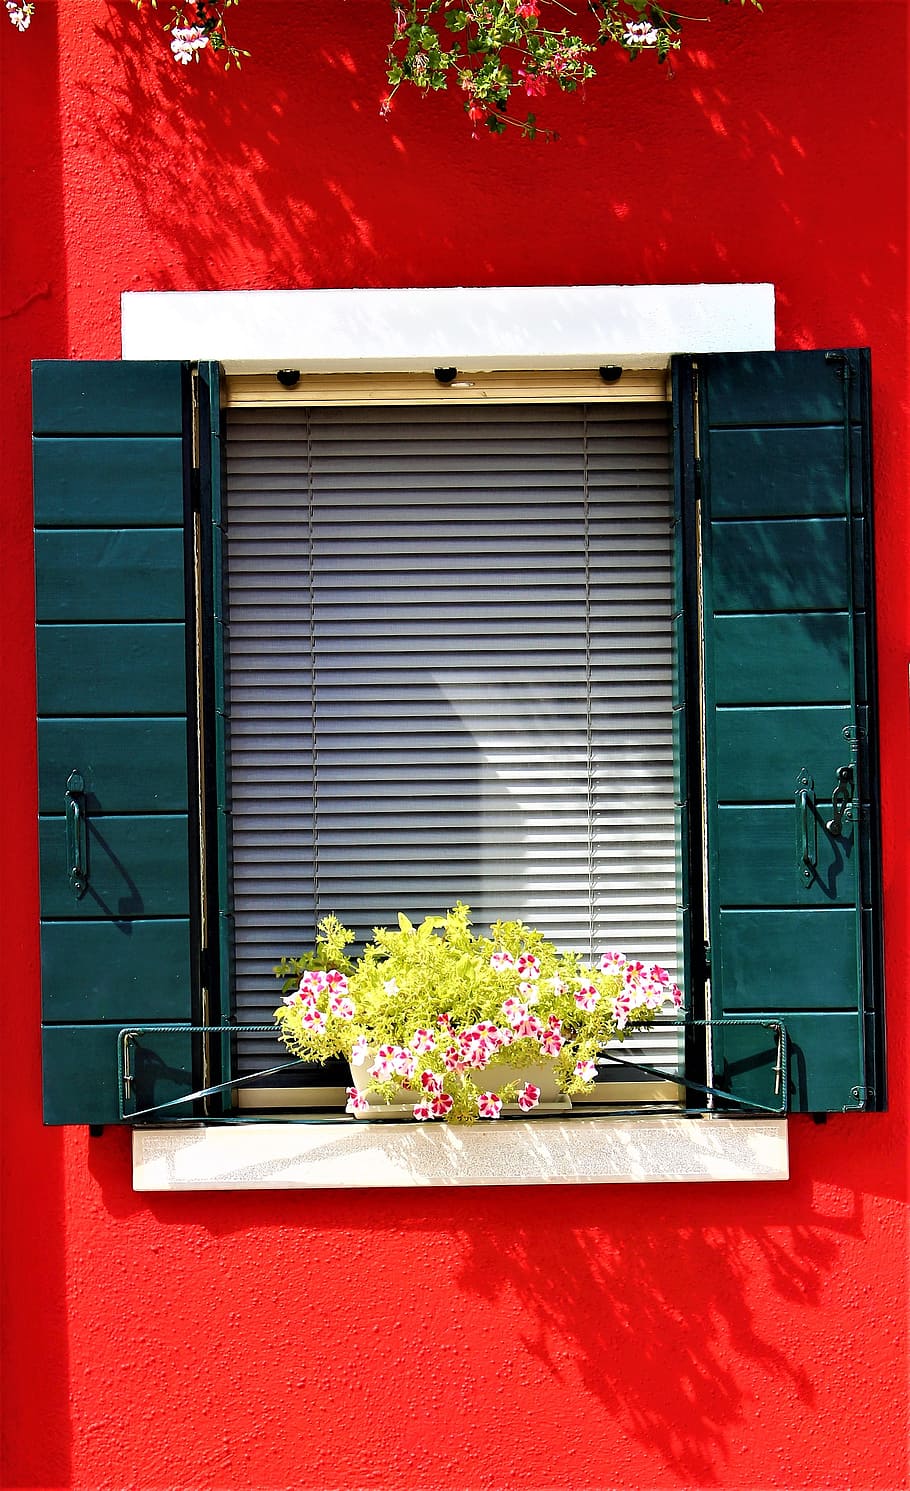 window, venice, burano, italy, colorful, picturesquely, shutters